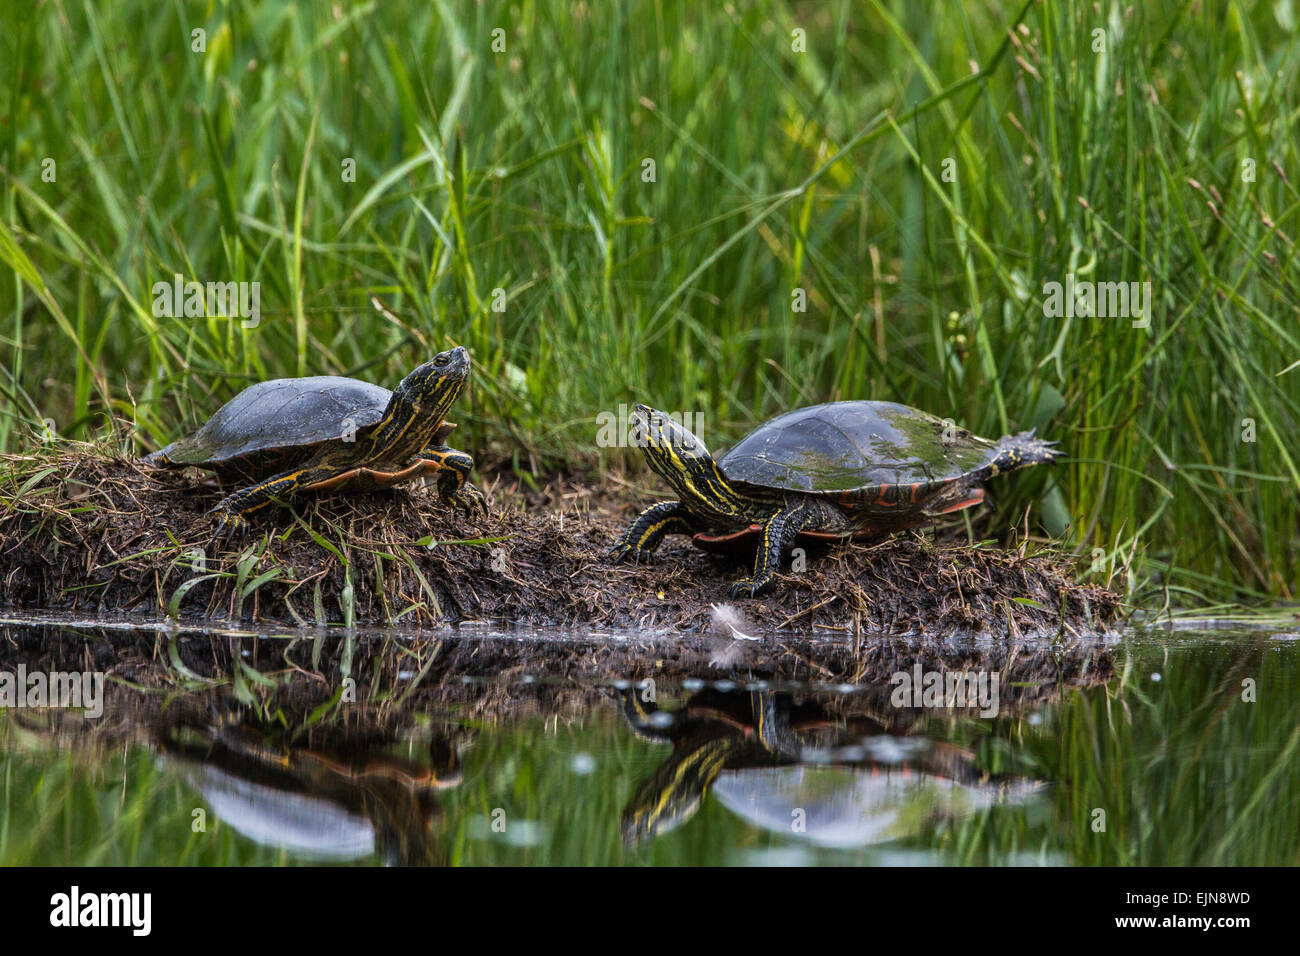 Two painted turtles Stock Photo